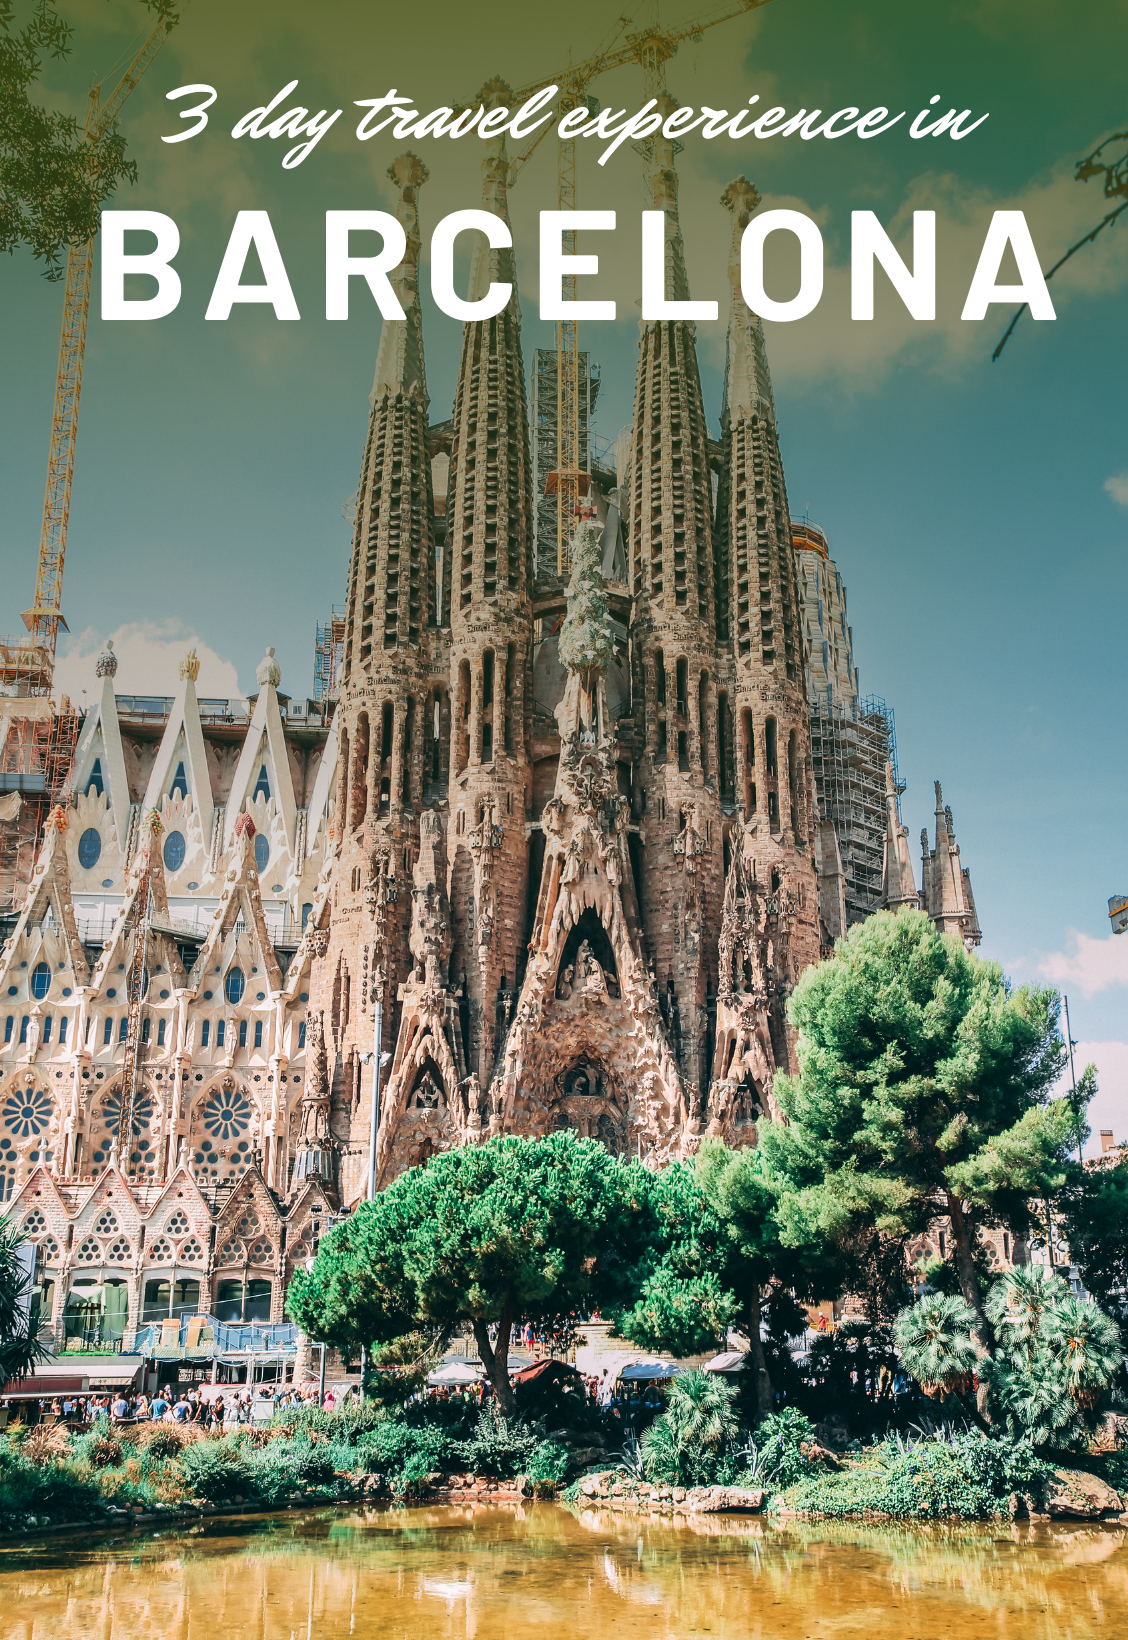 3 day travel experience in Barcelona